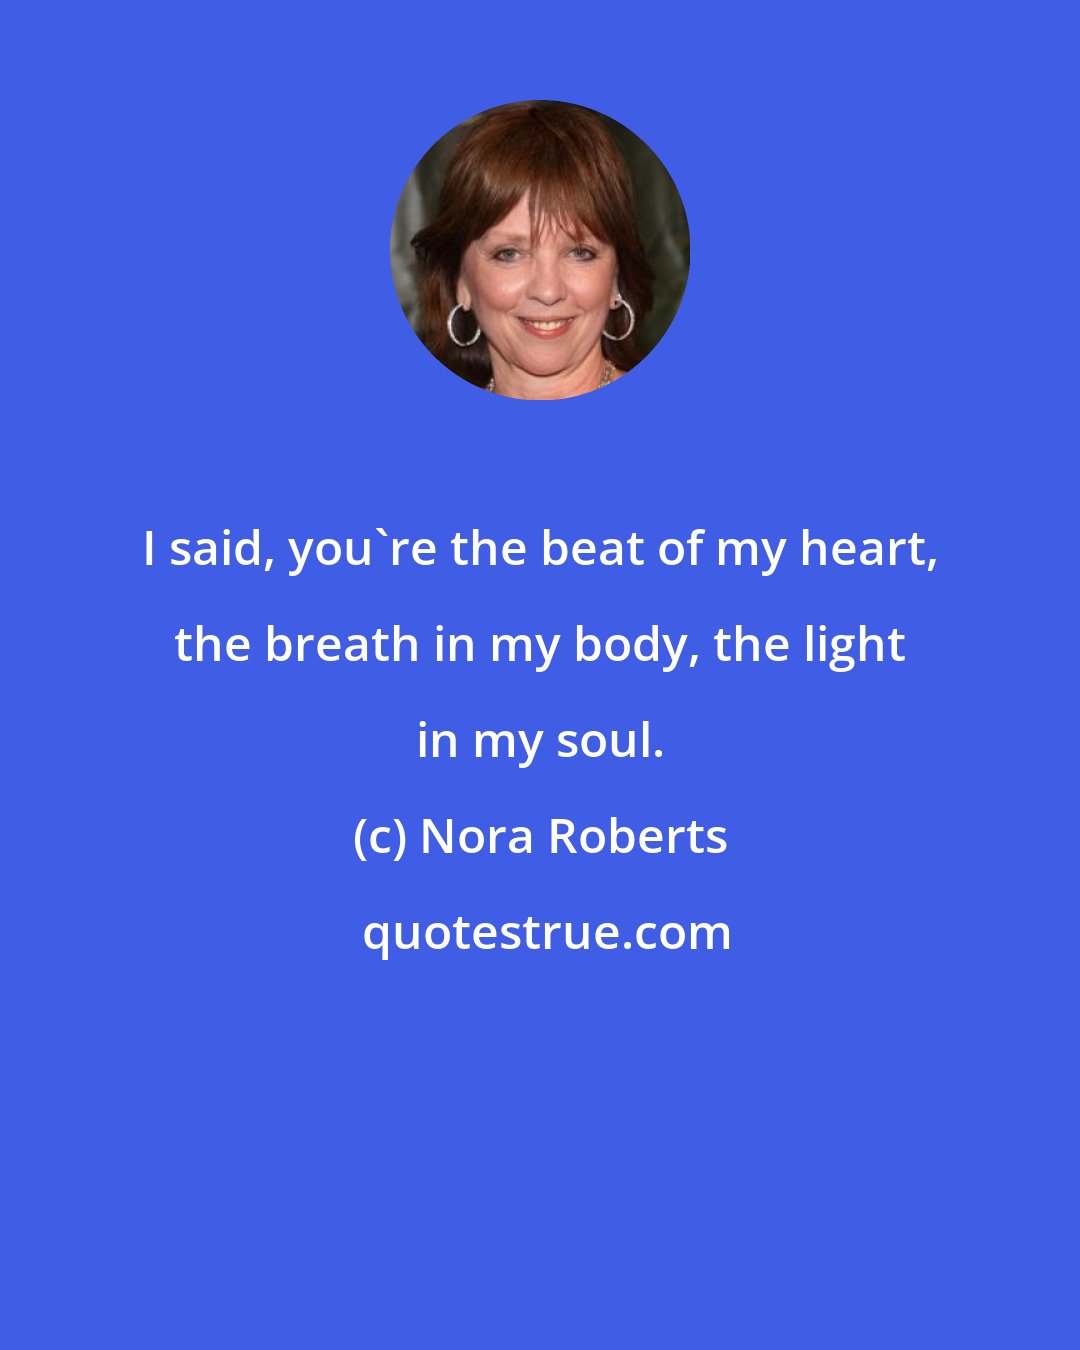 Nora Roberts: I said, you're the beat of my heart, the breath in my body, the light in my soul.